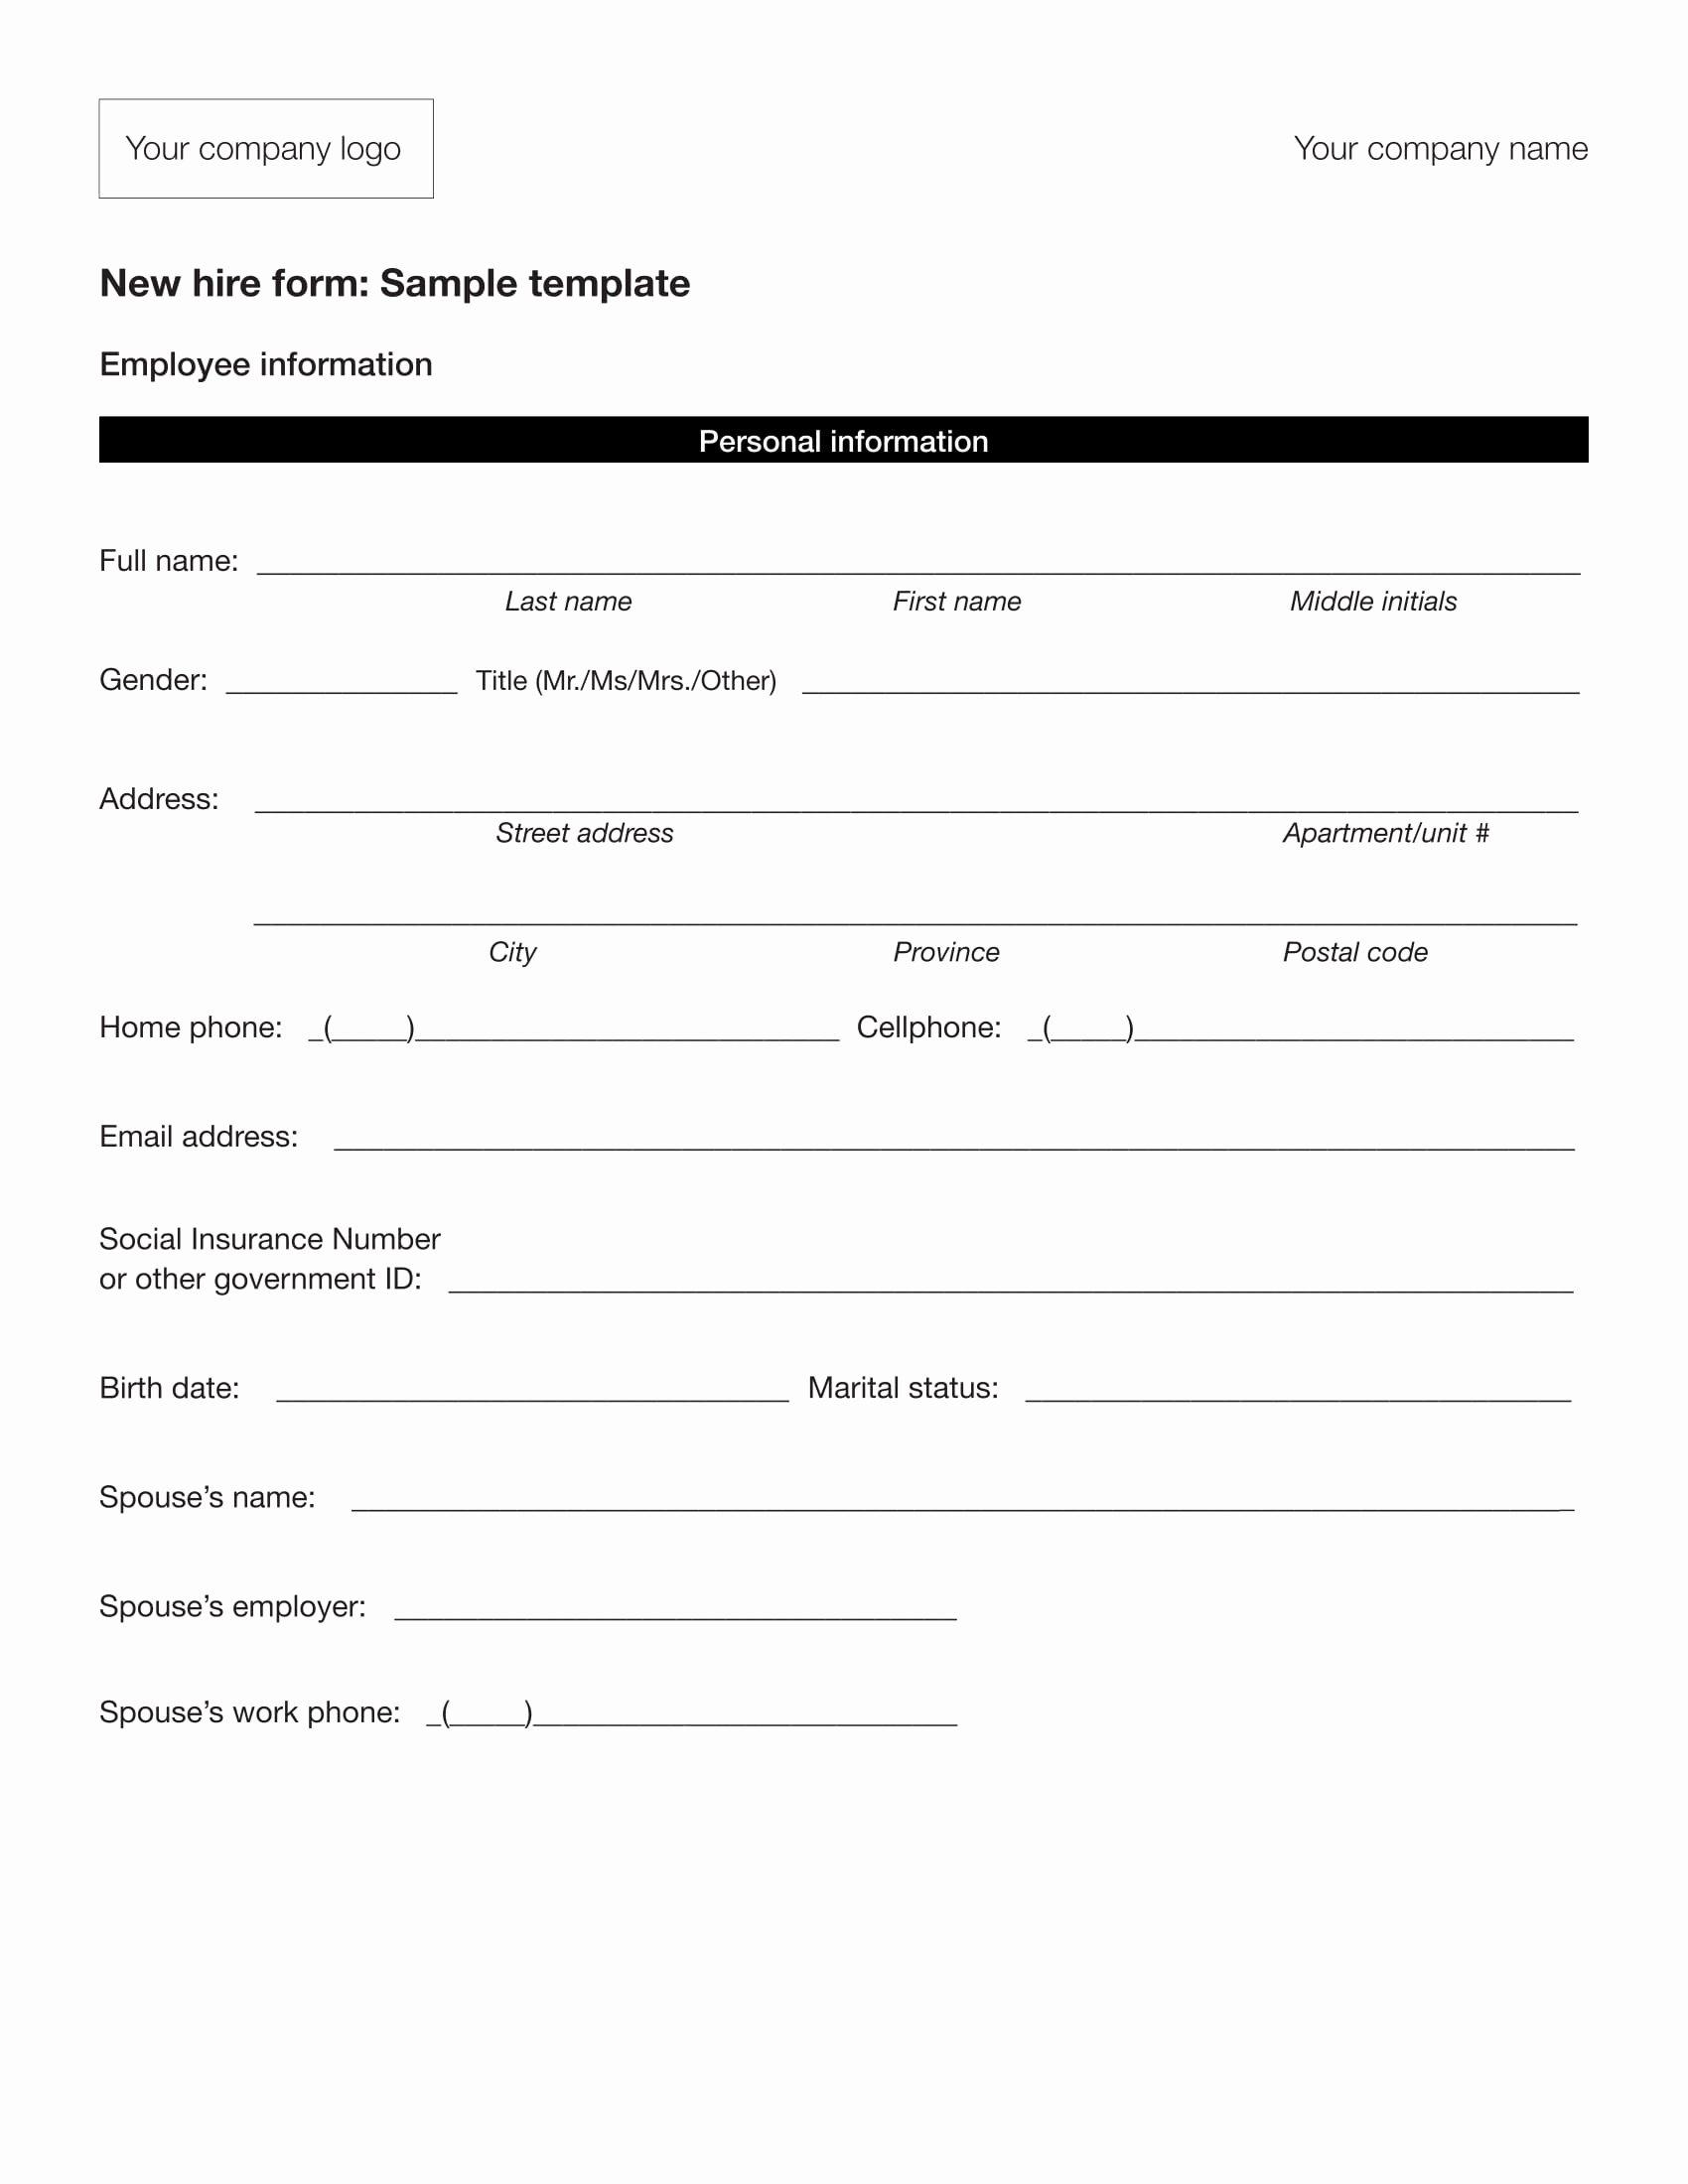 Employment Information form Template Luxury 13 Employee Information forms Free Word Pdf format